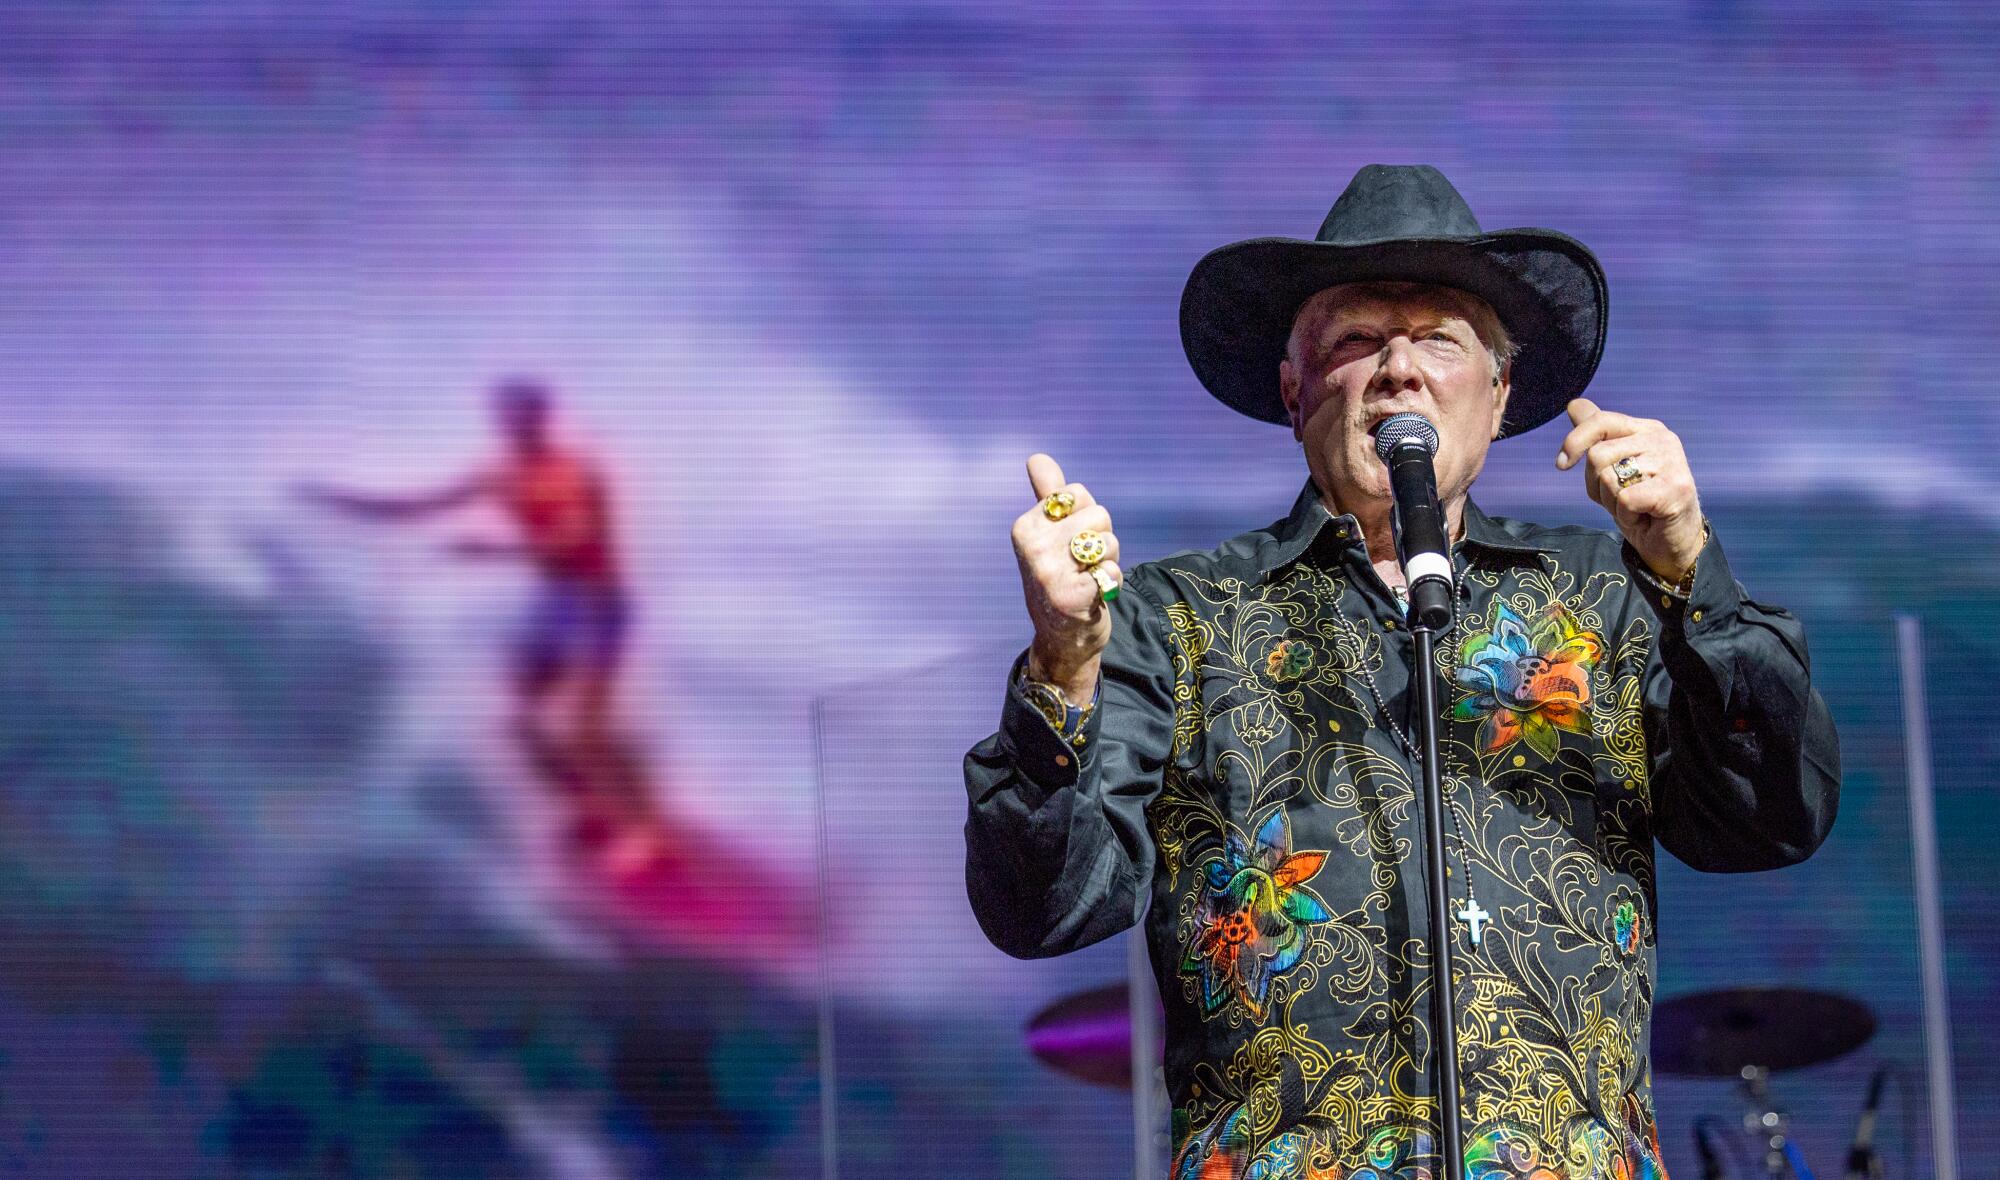 The Beach Boys' Mike Love performs on the Palomino Stage on the final day of Stagecoach.